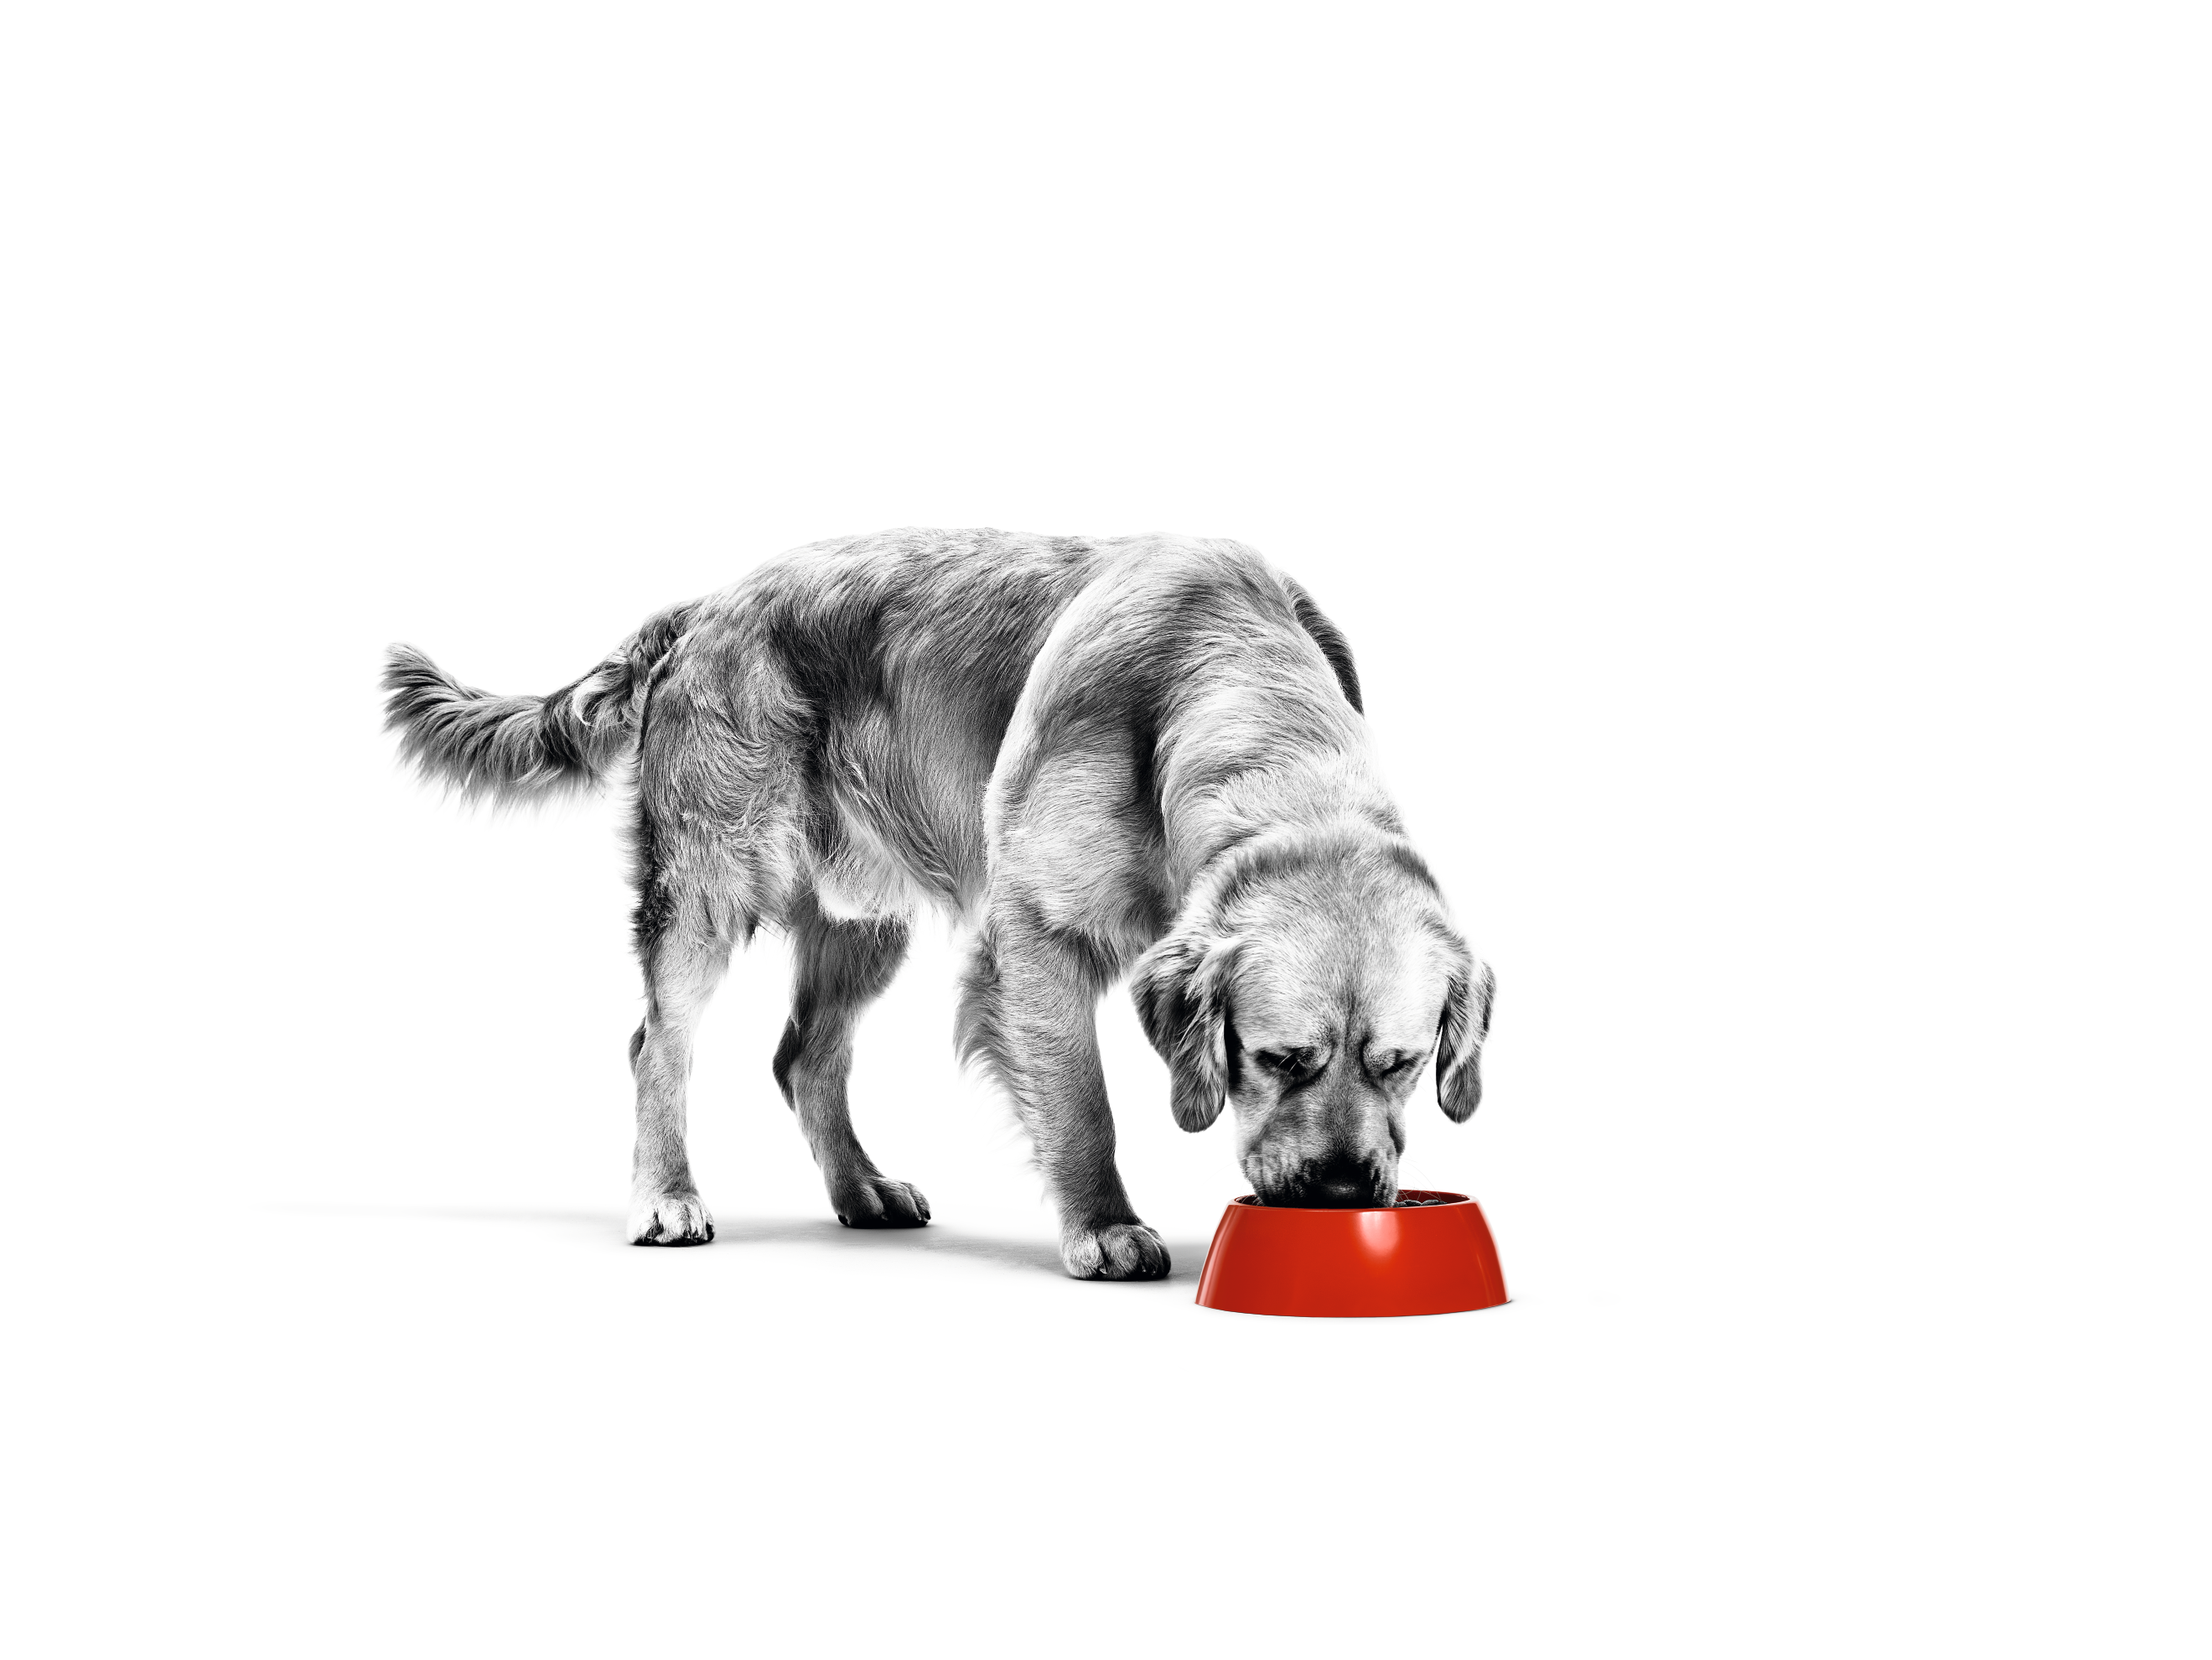 Golden Retriever eating out of a red bowl